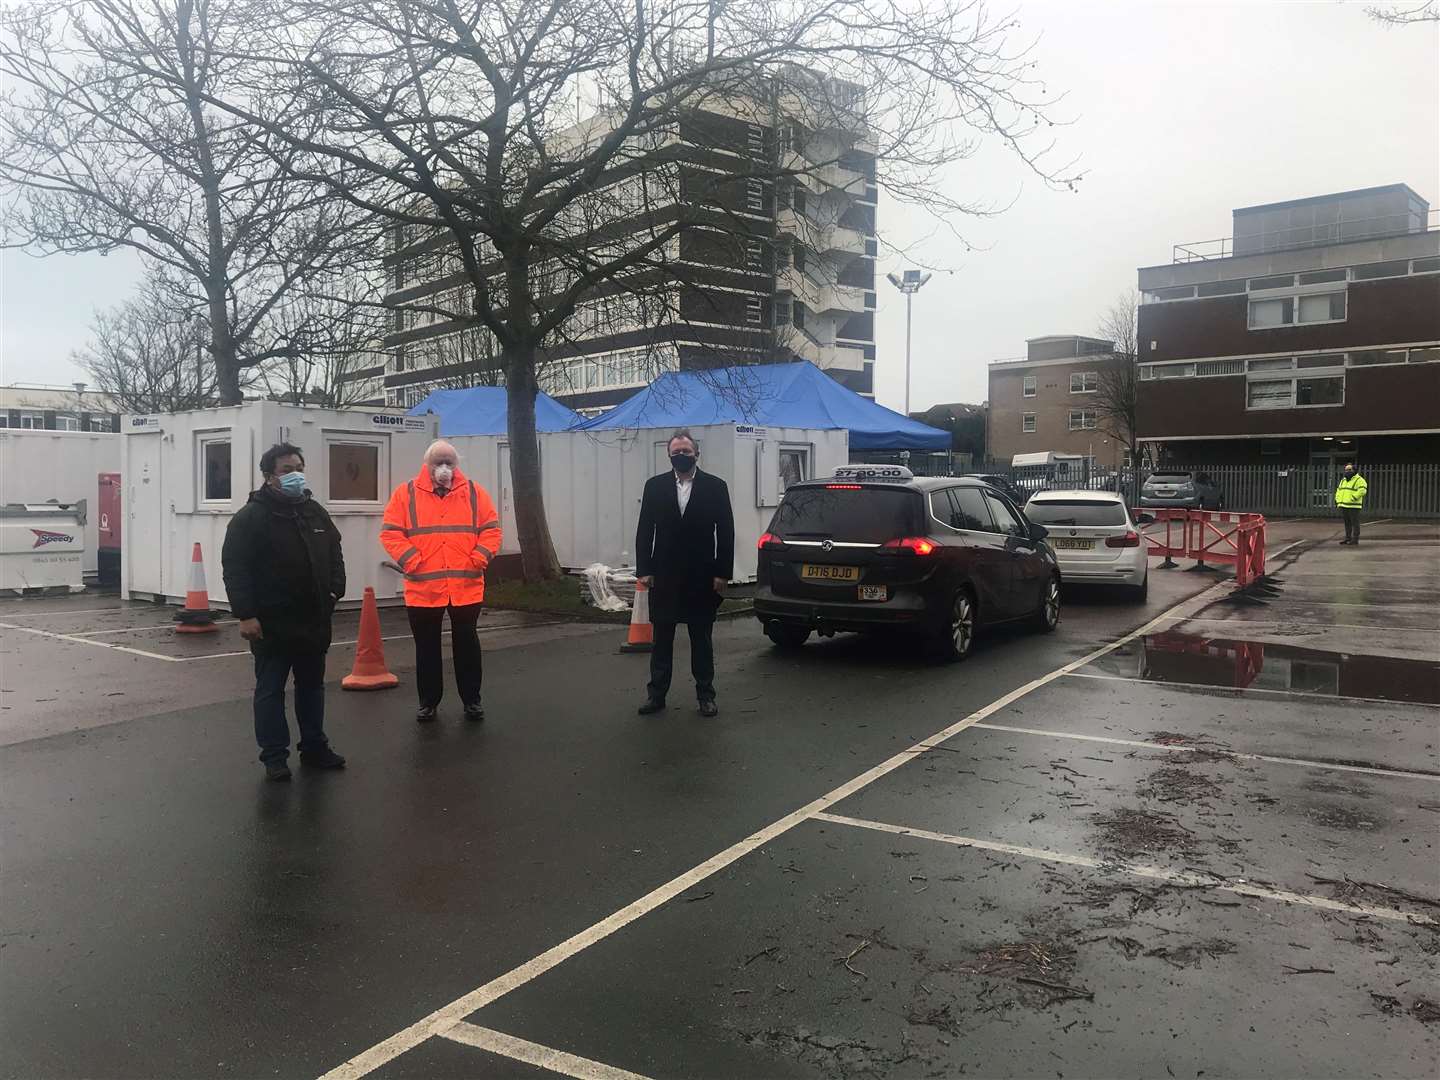 Dr Tuan Nguyen, Cllr David Monk and MP Damian Collins at the Civic Centre vaccine site in Folkestone. Picture: Damian Collins Twitter